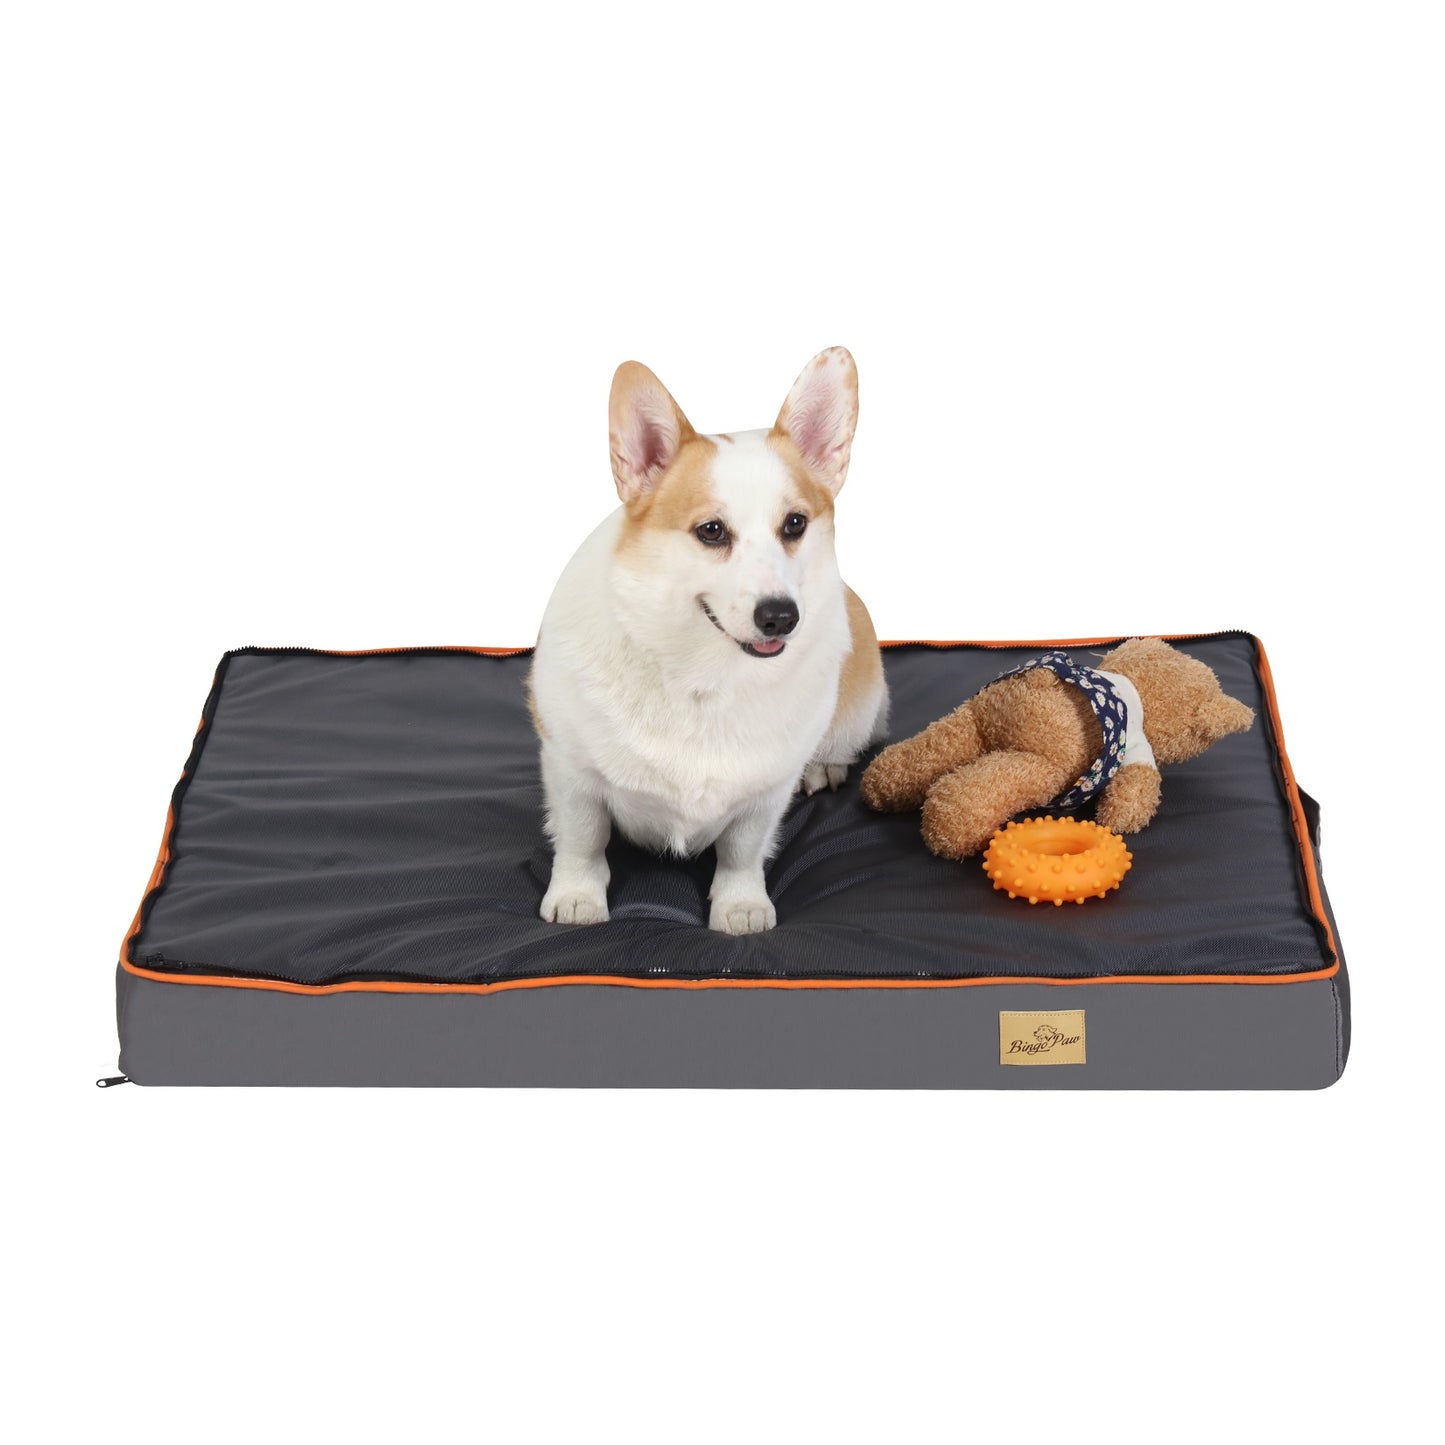 Large Jumbo Soft Orthopedic Dog Bed Pet Kennel Pillow Bed w/ Washable Cover